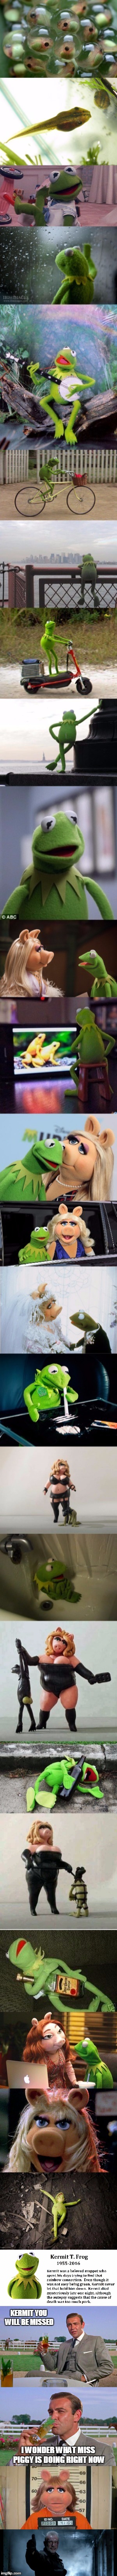 The Life and Death of Kermit | KERMIT YOU WILL BE MISSED; I WONDER WHAT MISS PIGGY IS DOING RIGHT NOW | image tagged in memes,kermit the frog,sean connery  kermit,miss piggy | made w/ Imgflip meme maker